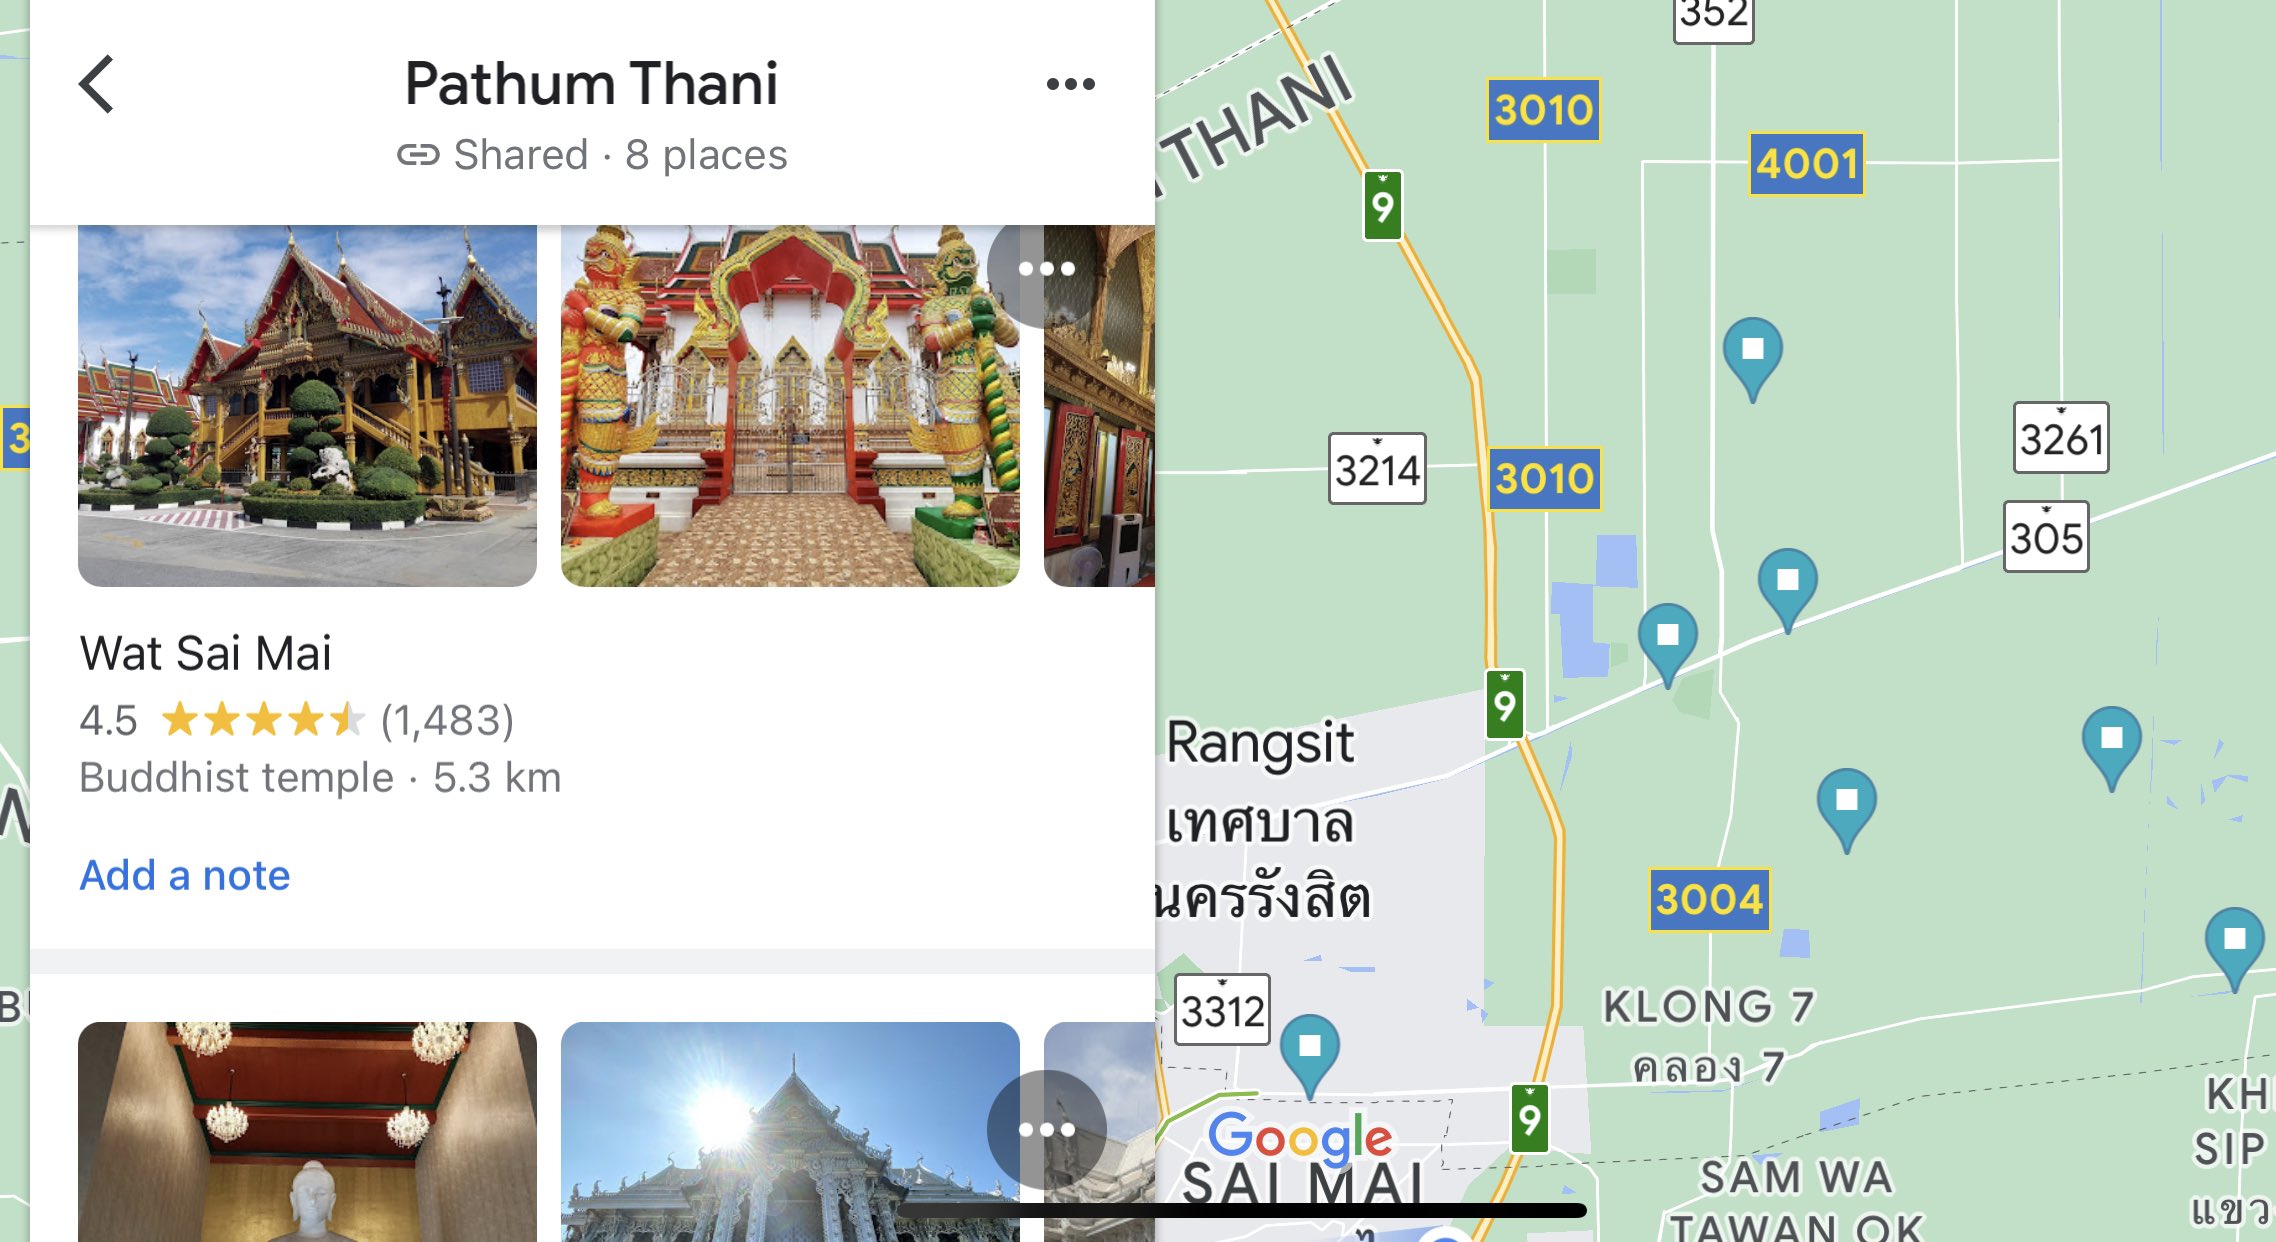 Richard Barrow In Thailand I Hope You Enjoyed My Photos From Today S Trip In Pathum Thani Province Here Is The Google Map List Of All The Places That I